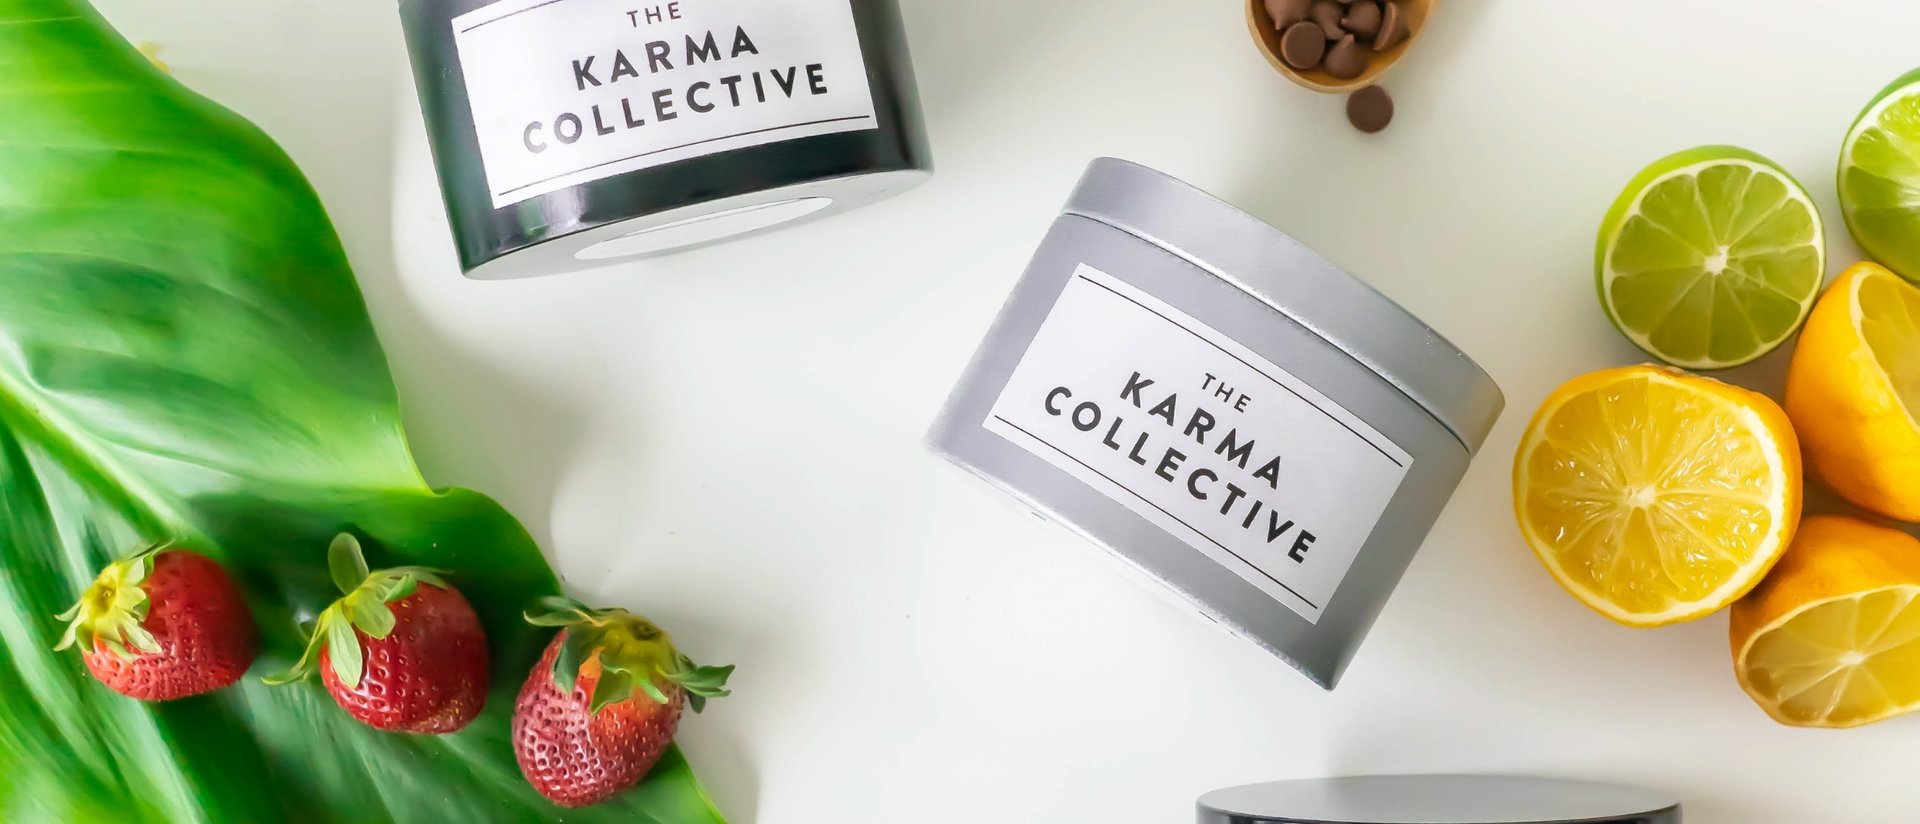 Luxury scented candles from The Karma Collective